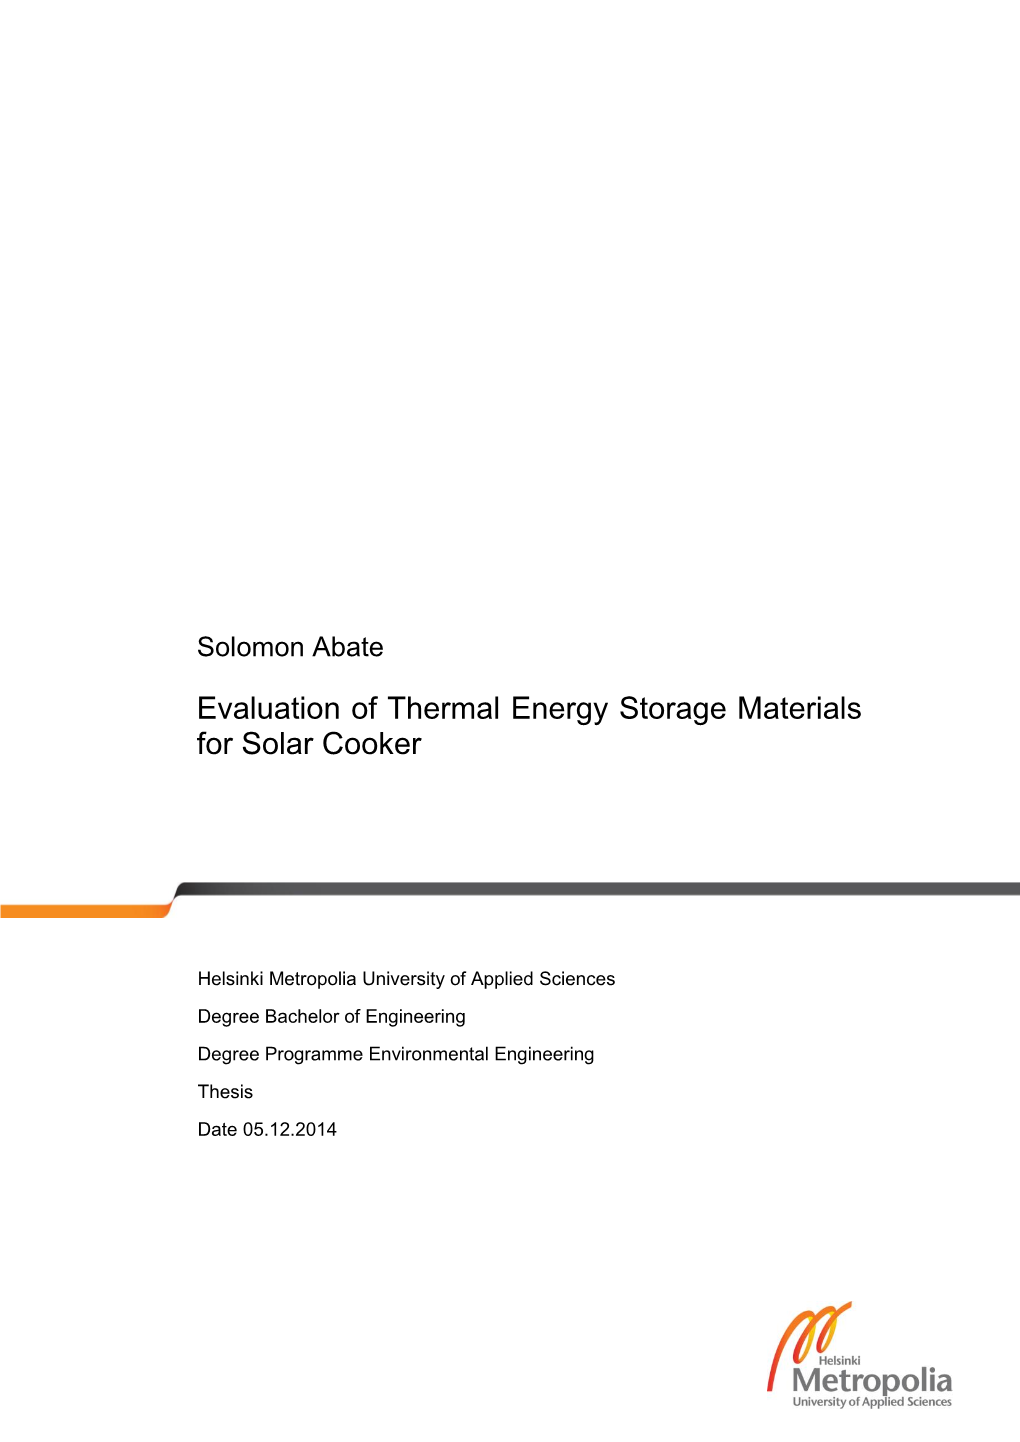 Evaluation of Thermal Energy Storage Materials for Solar Cooker